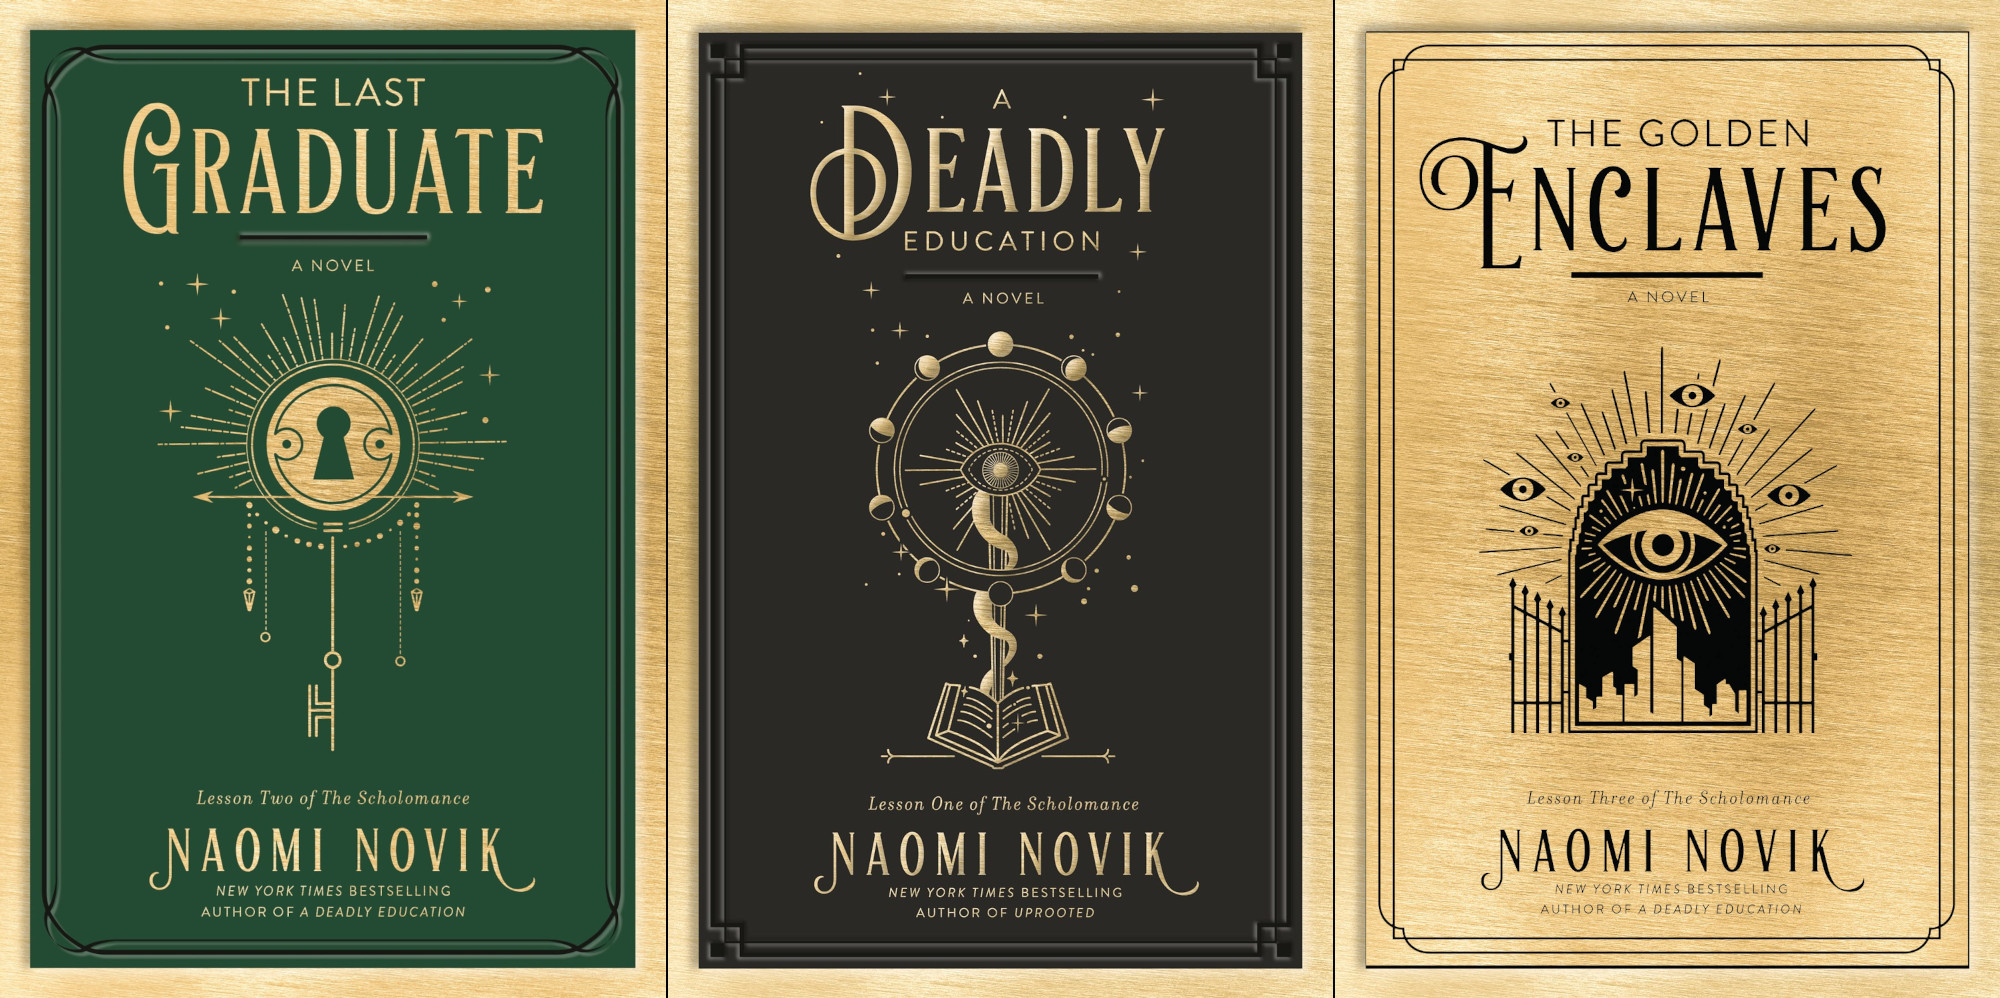 Naomi Novik on X: Absolutely stunned by the epic praise in this beautiful  love letter thread to the Scholomance series. Thank you, thank you, thank  you @doctorow - I'm perfectly speechless. /